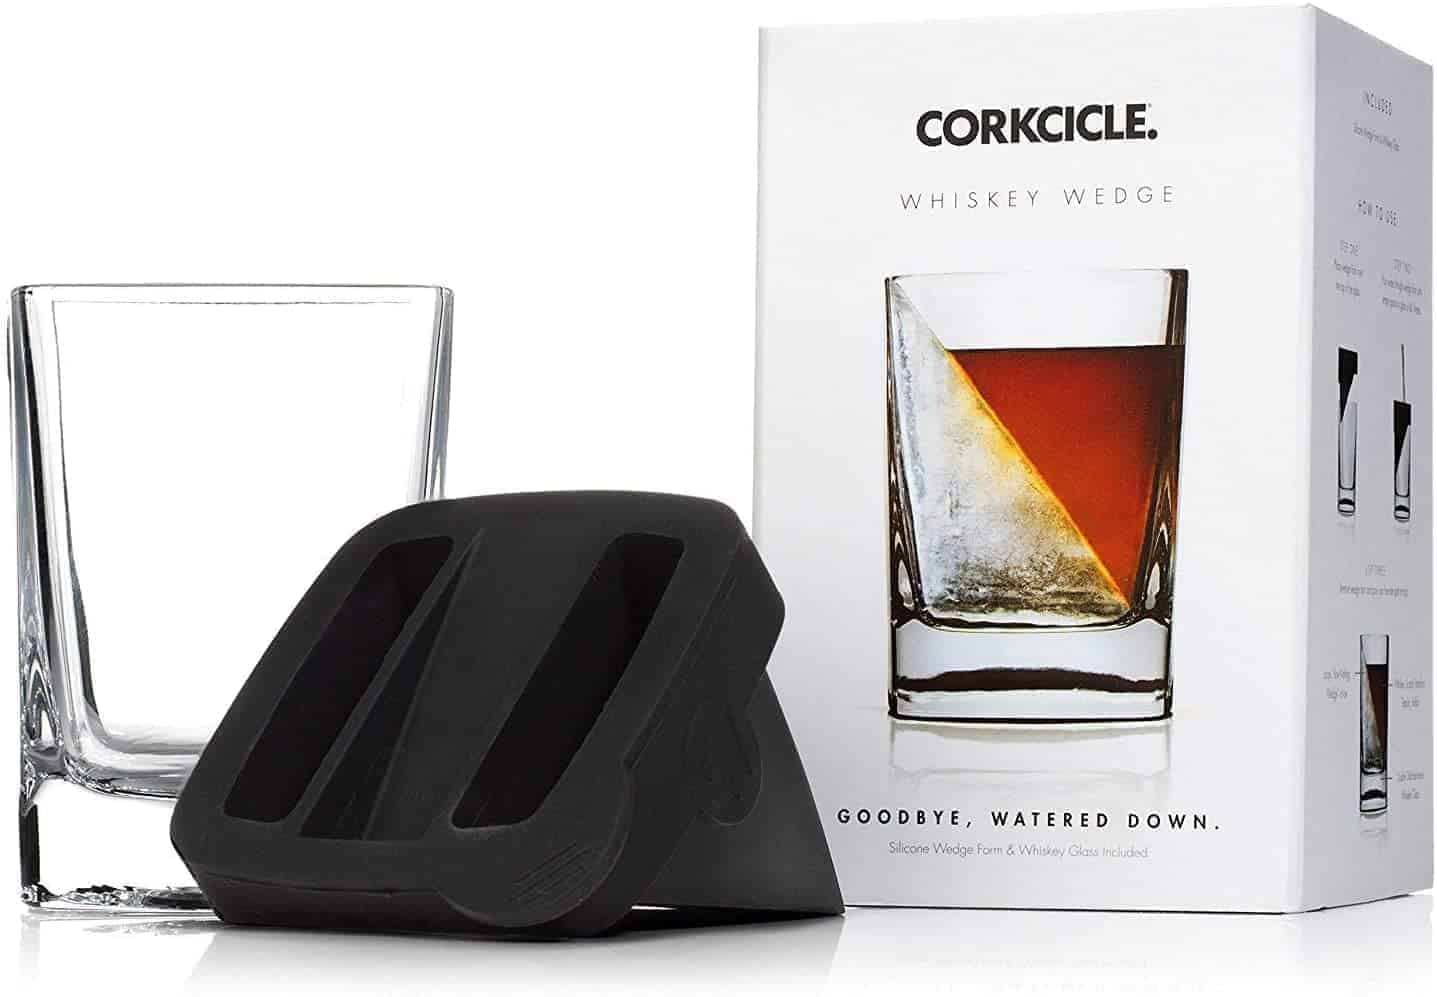 Corkcicle-Whiskey-Wedge-Fathers-Day-Gift-Ideas